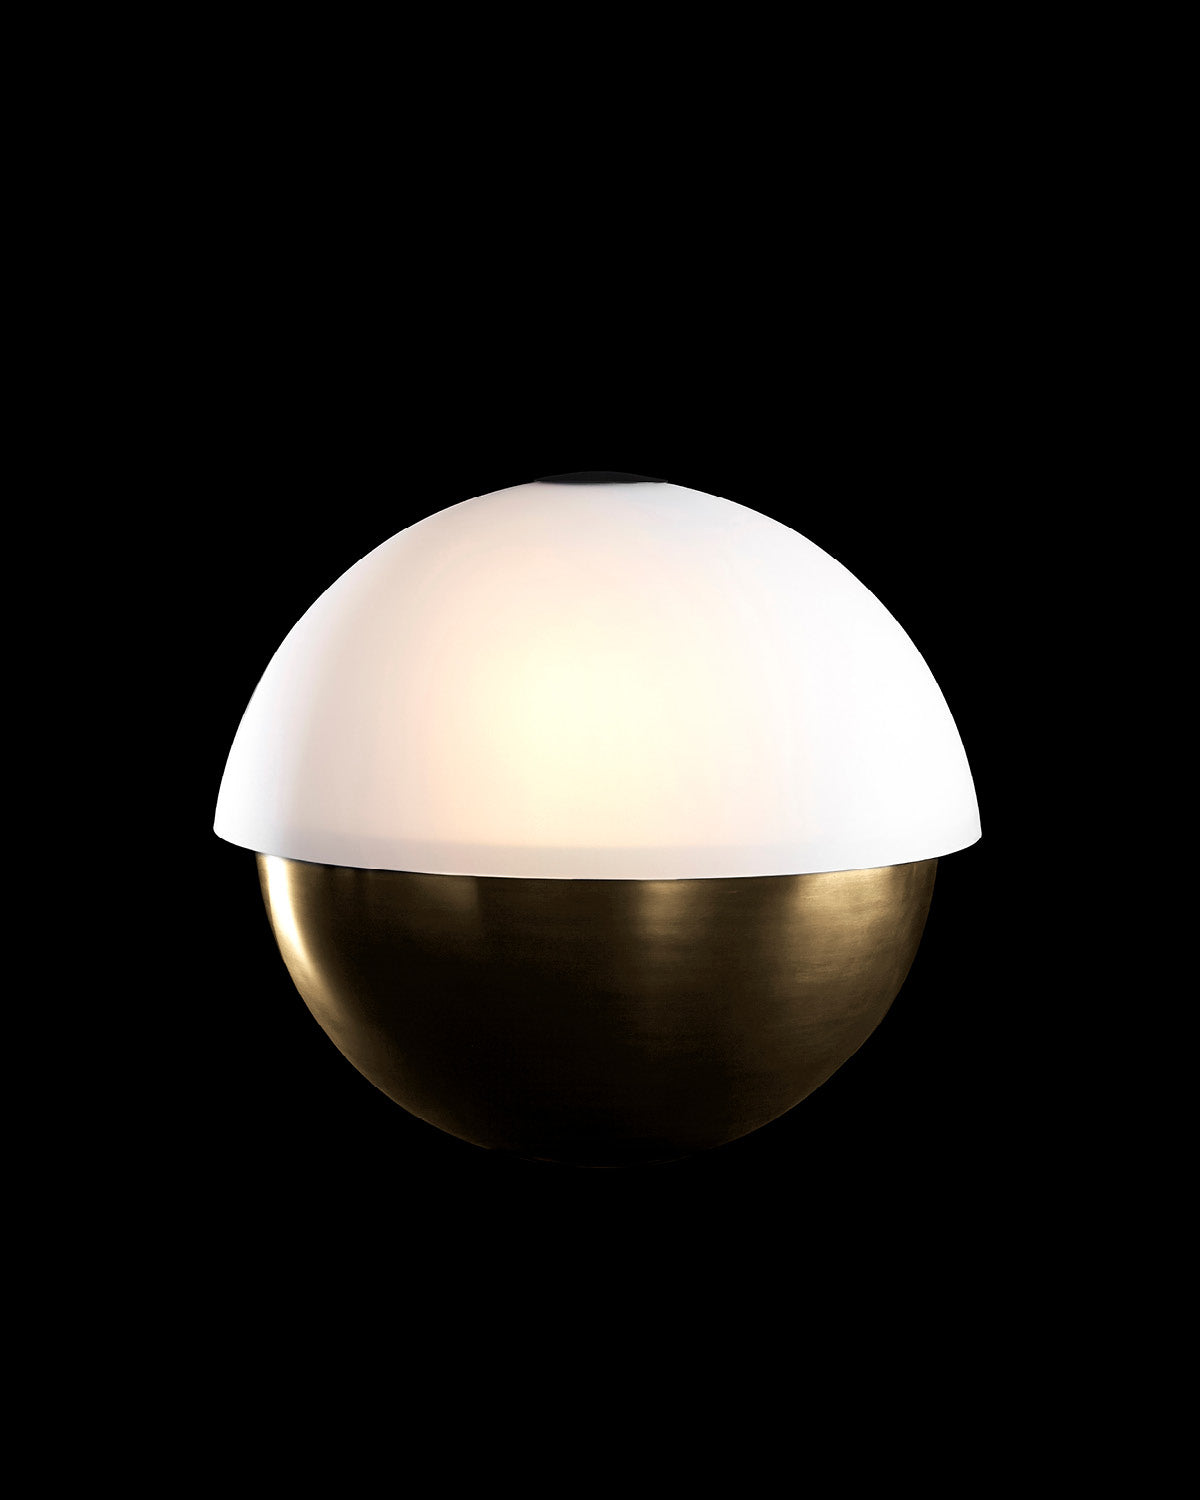 AXON : LARGE table lamp in Aged Brass finish, positioned against a black background. 